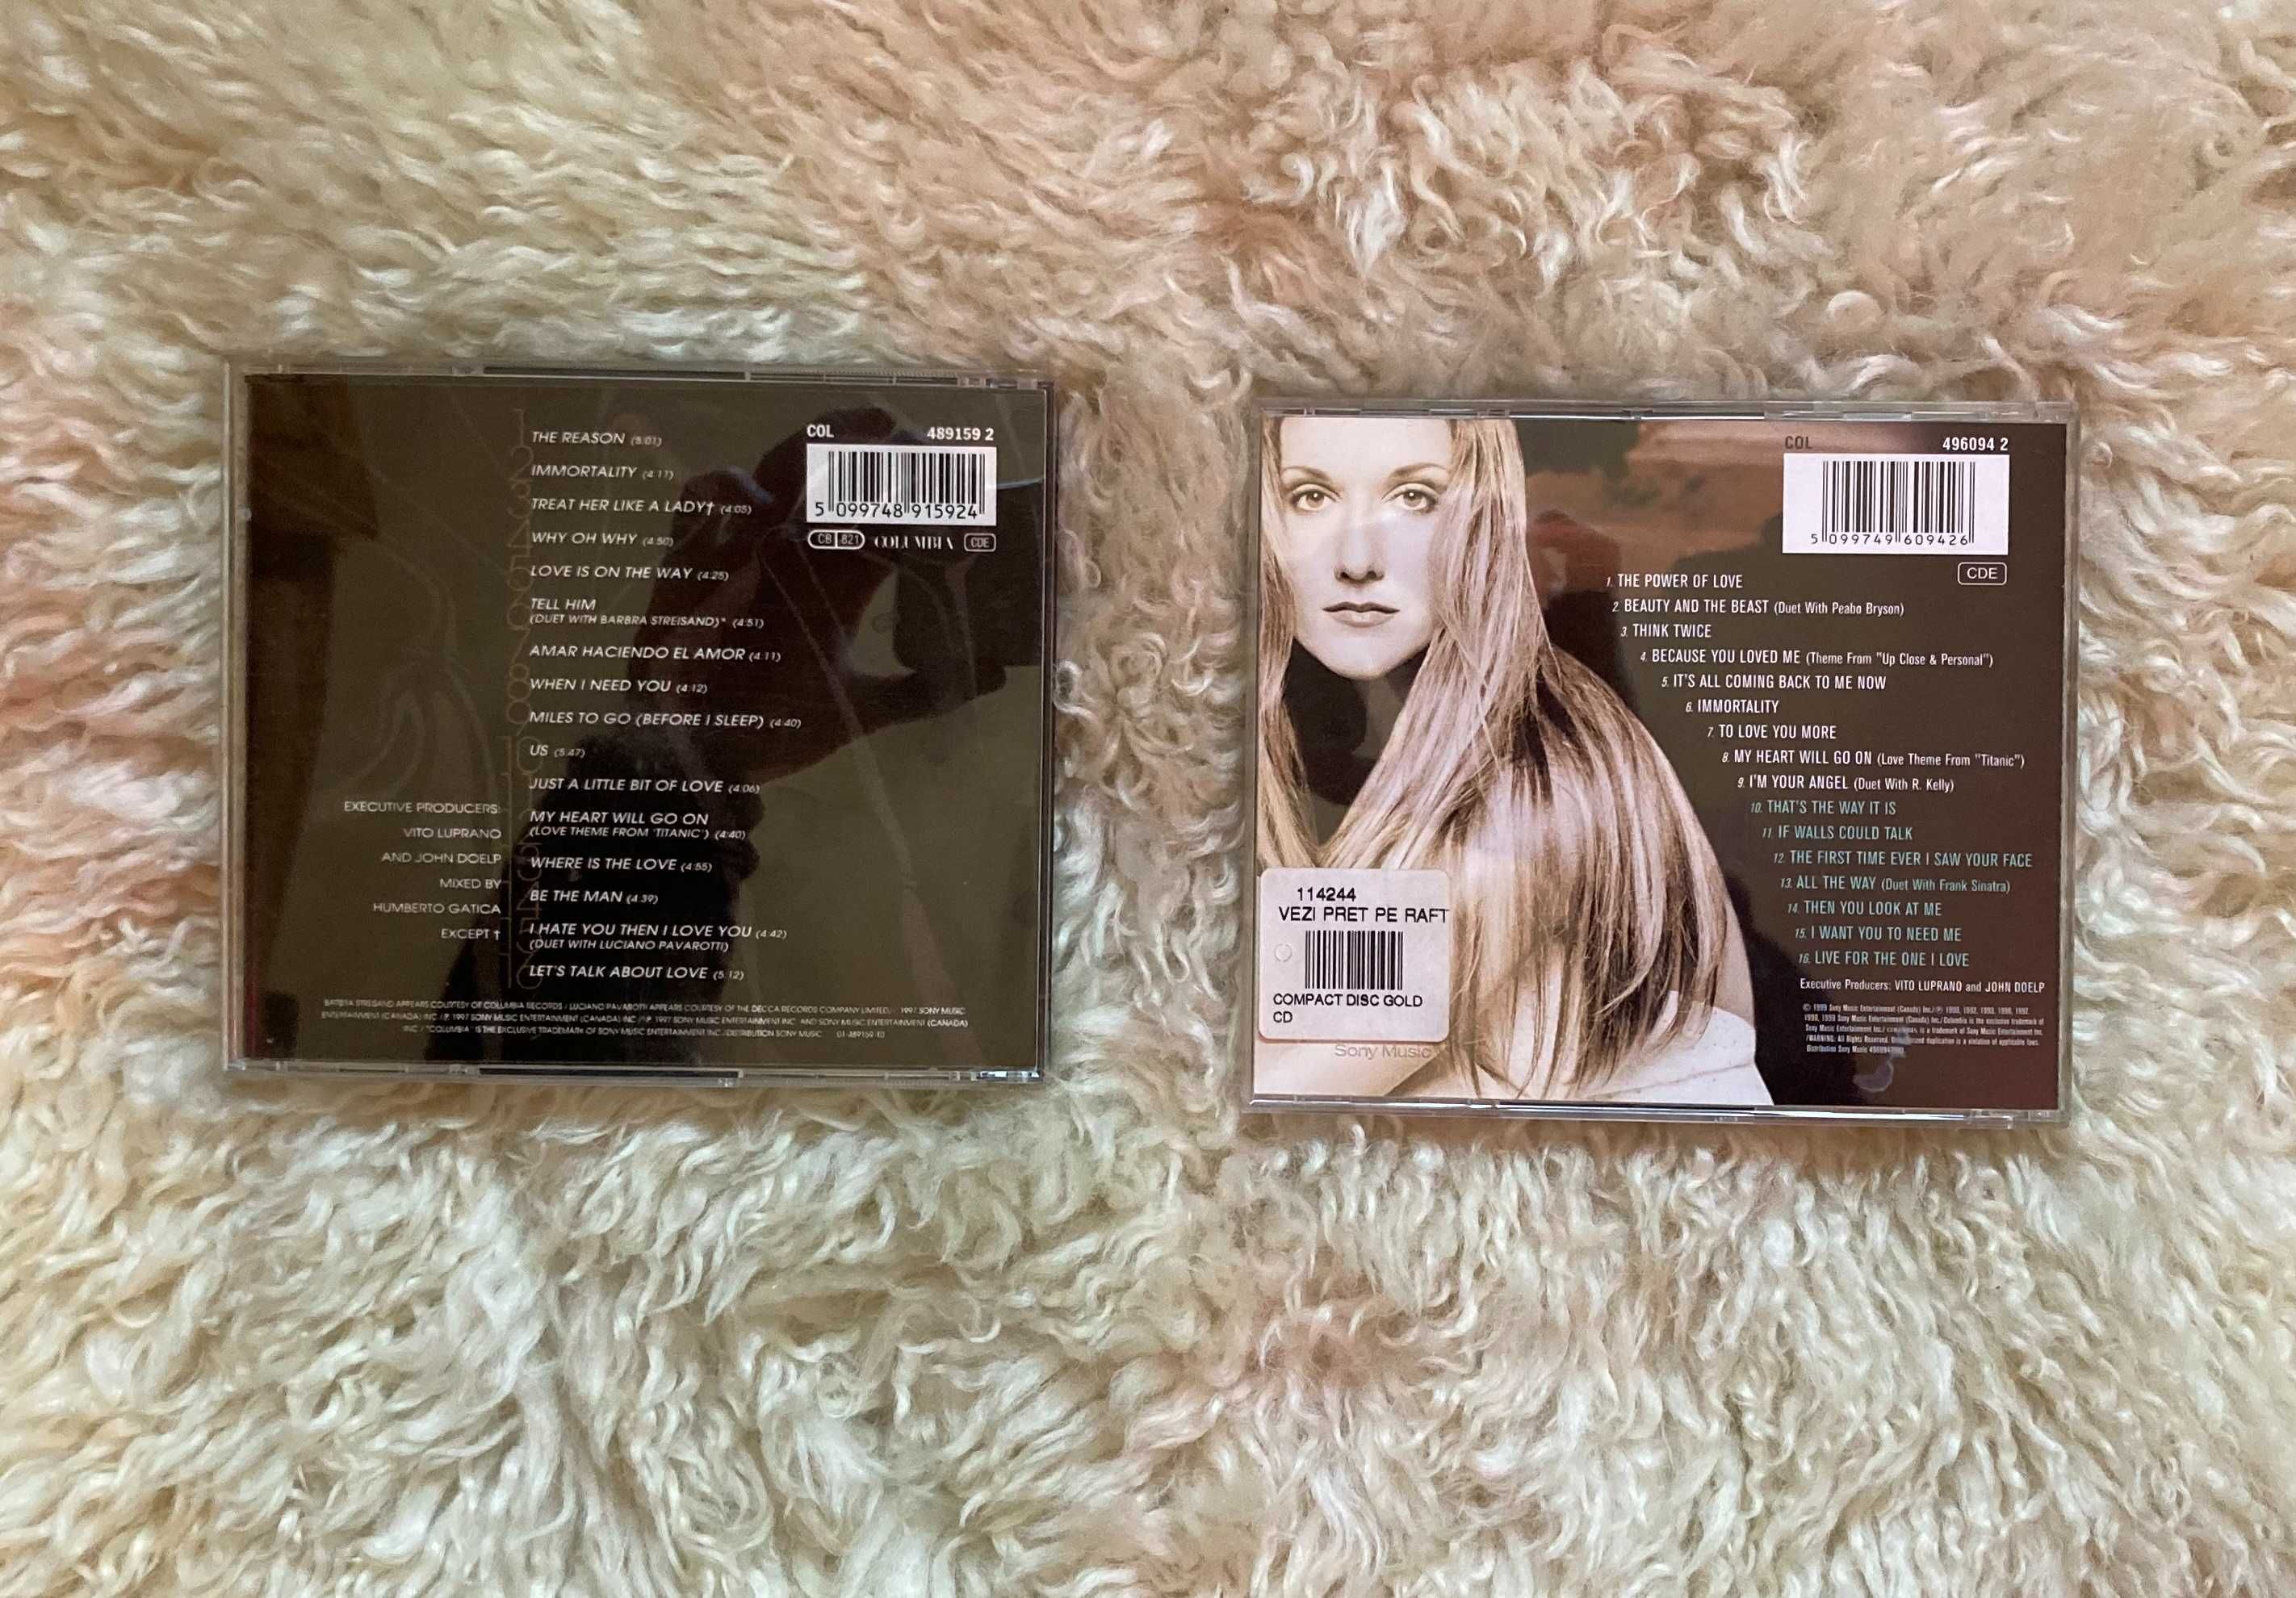 Celine Dion - Let's talk about love / All the way... a decade of song